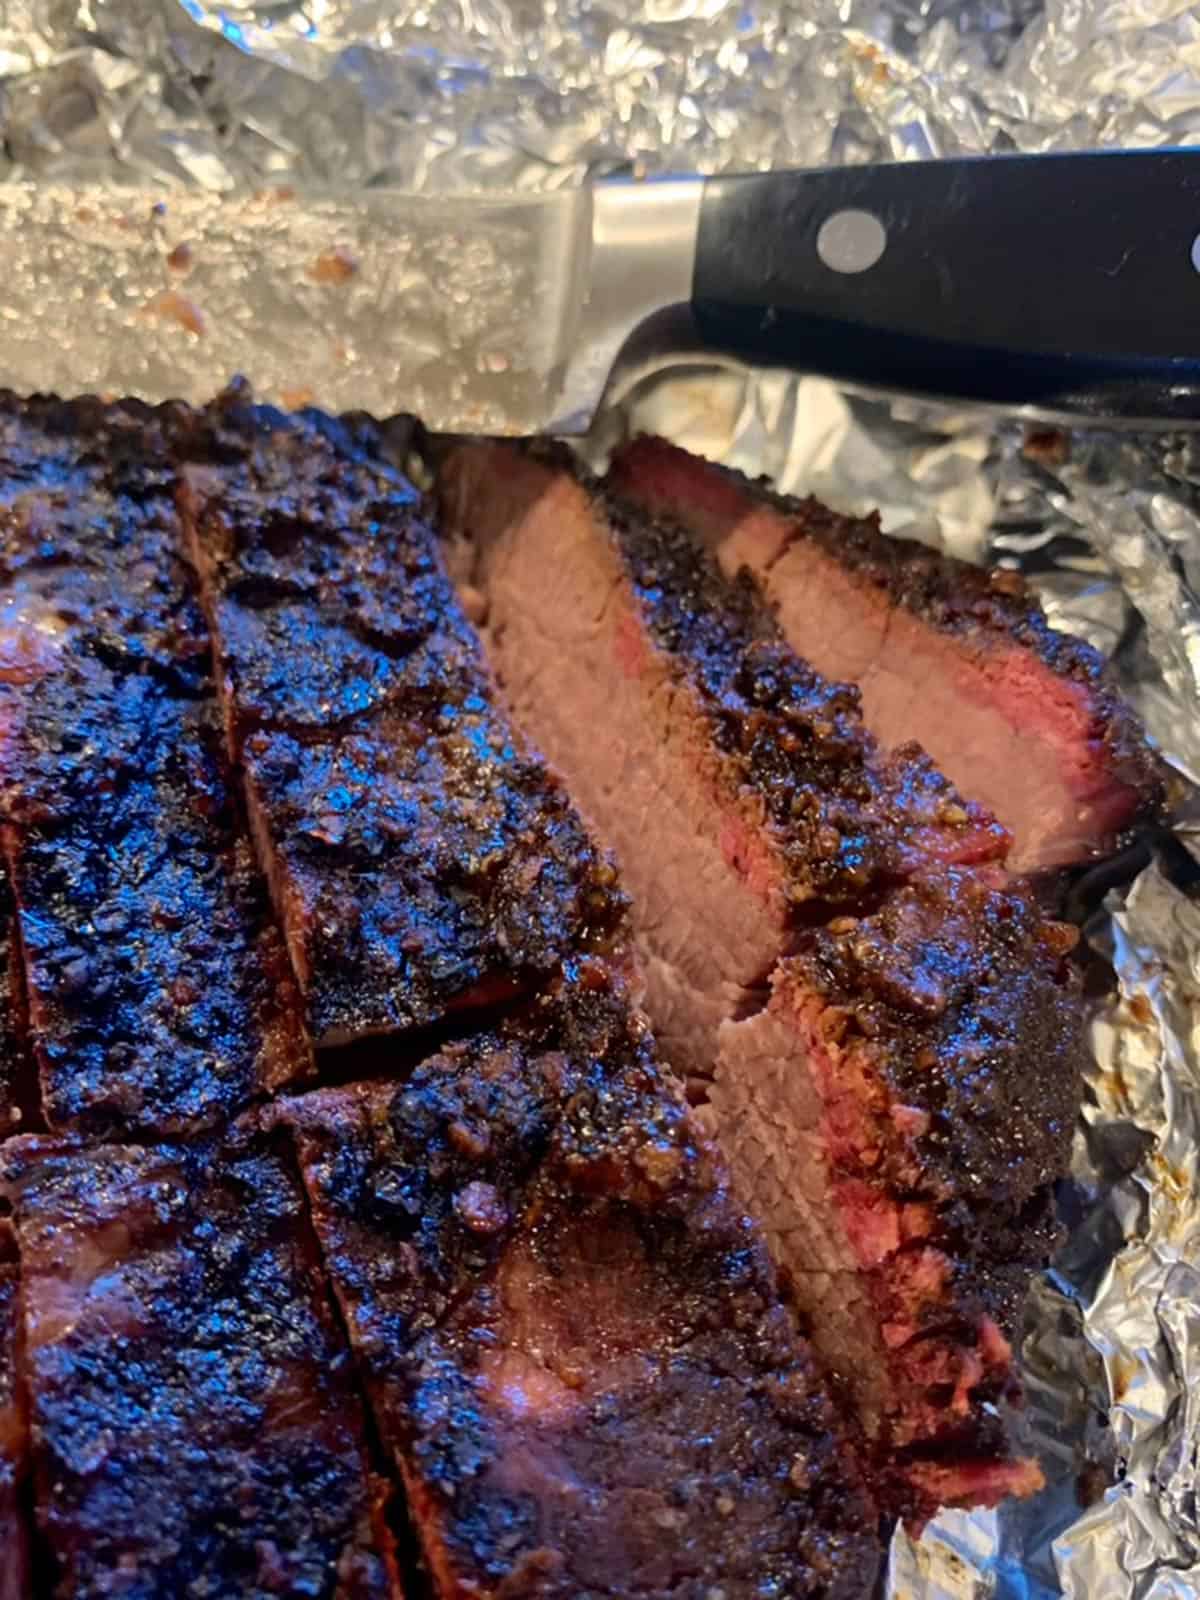 A smoked brisket with a carving knife.